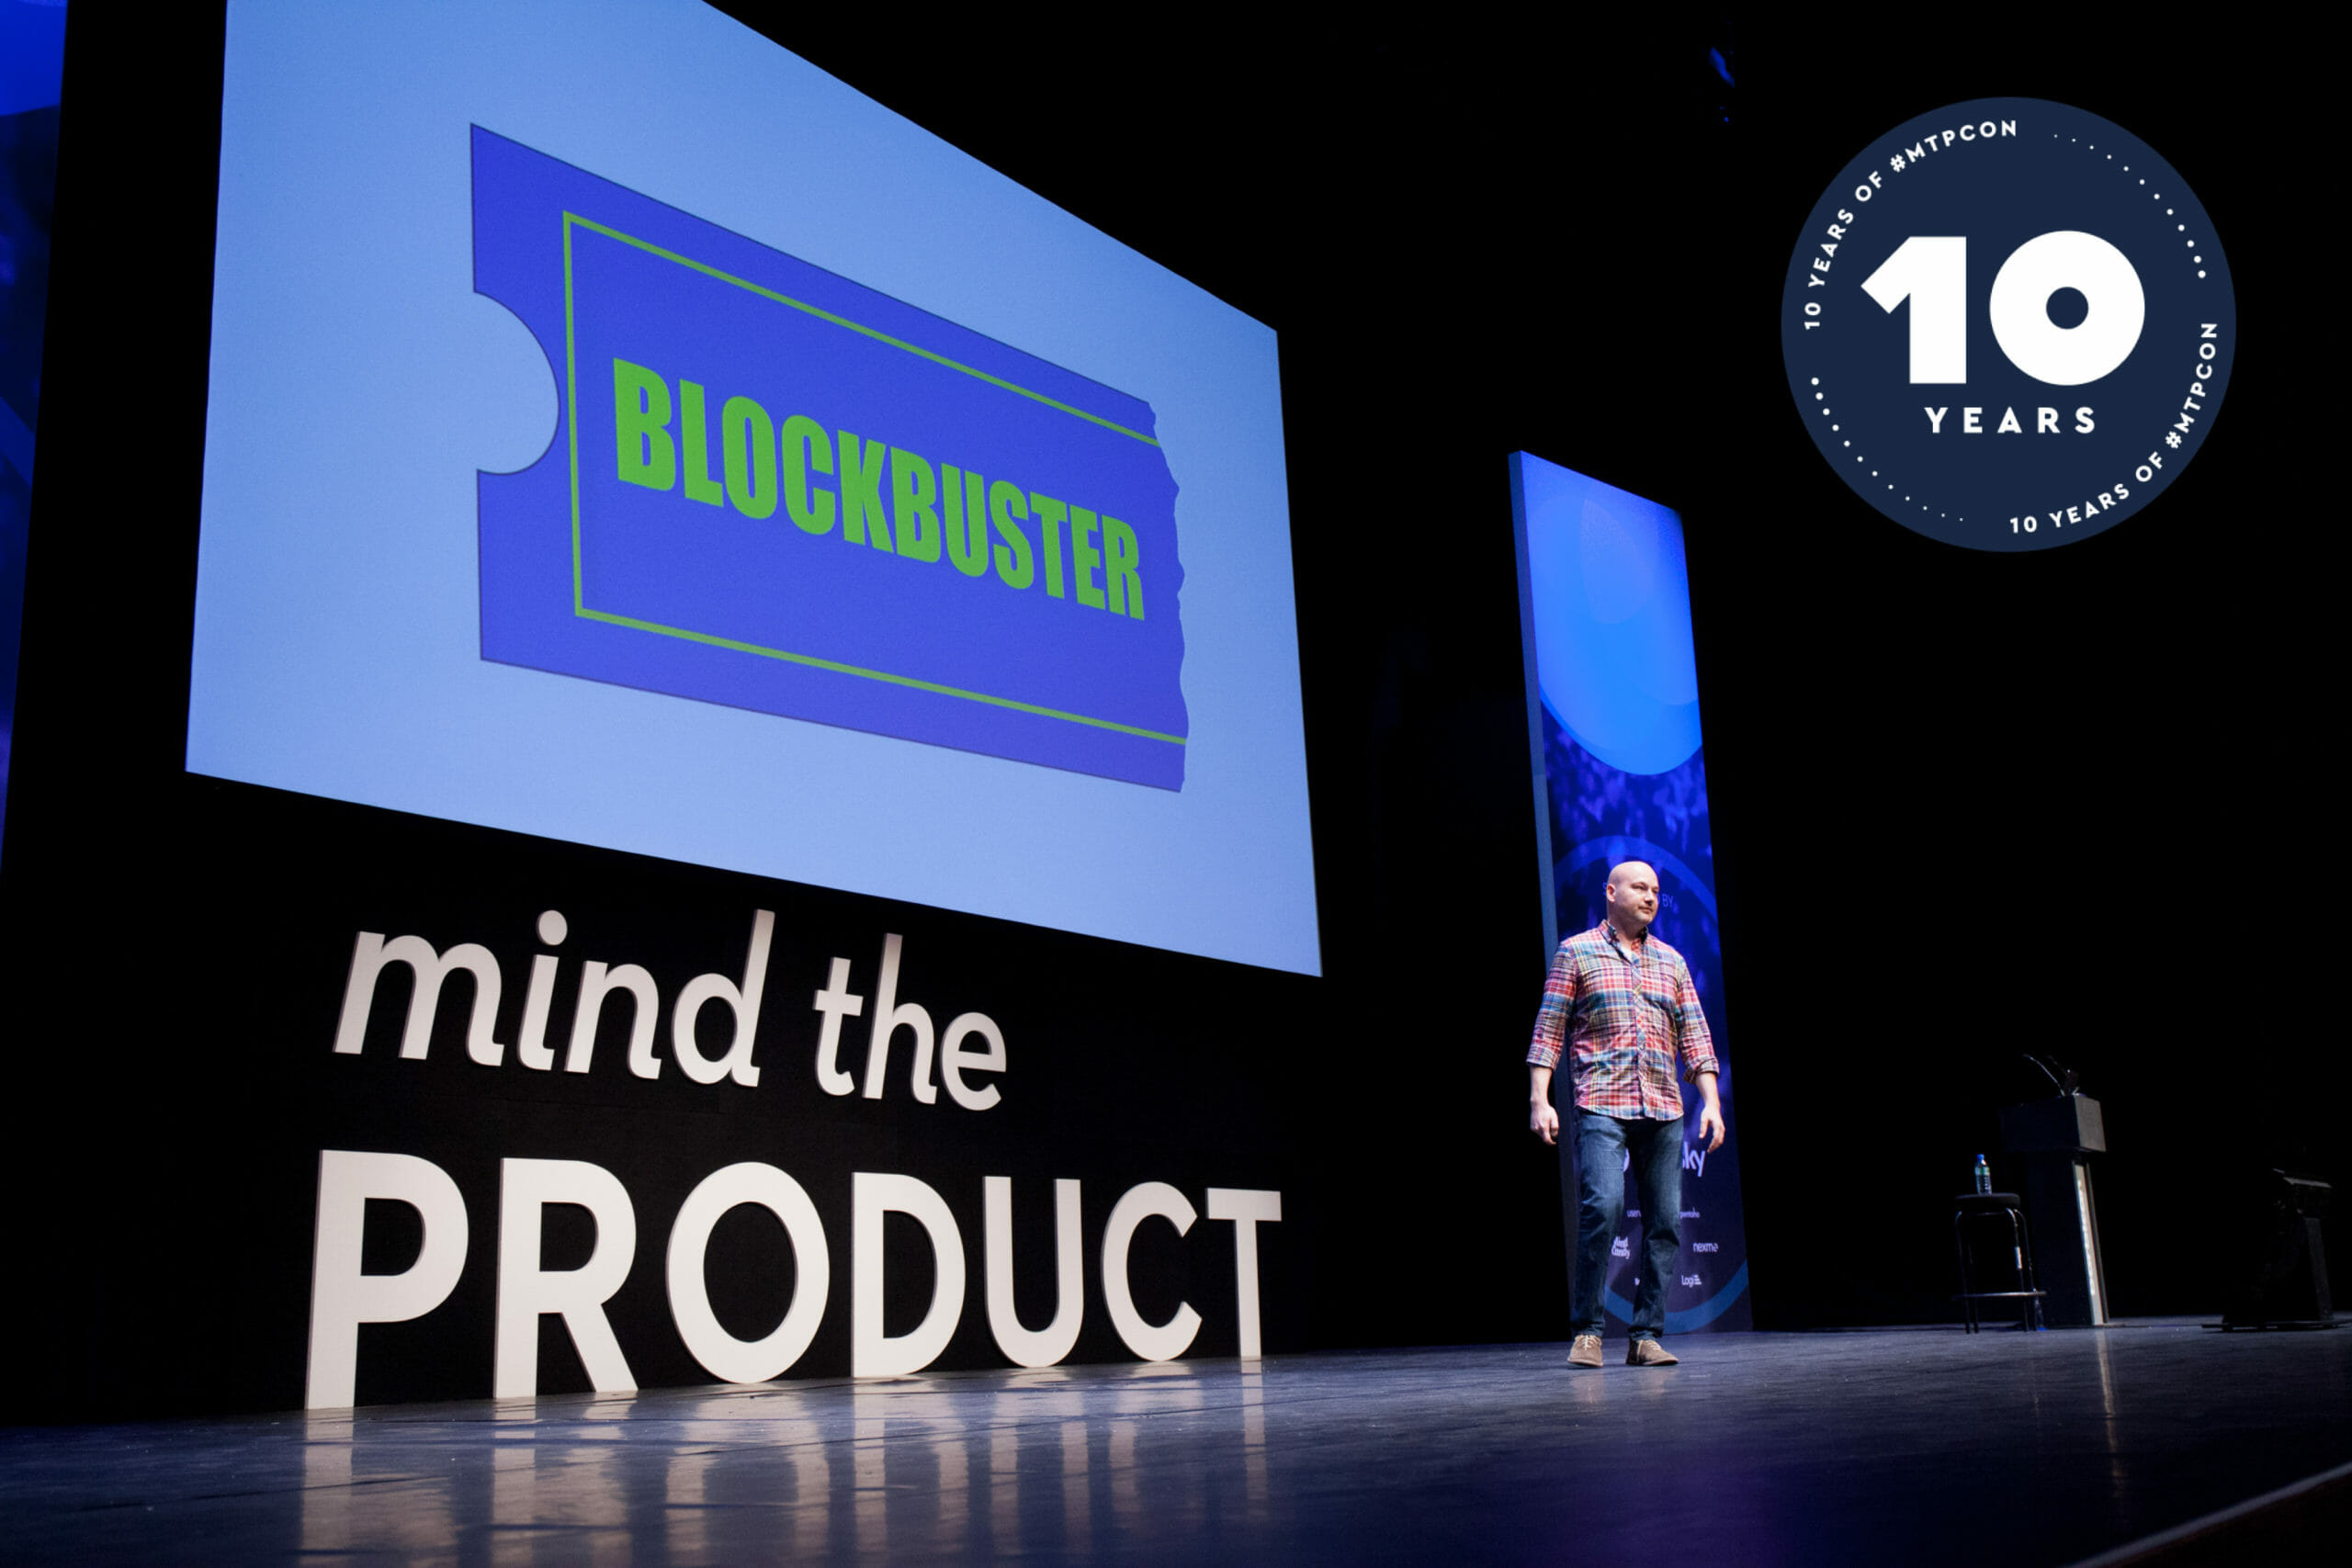 Learnings from London: Dave Wascha - Inside the mind of a product manager